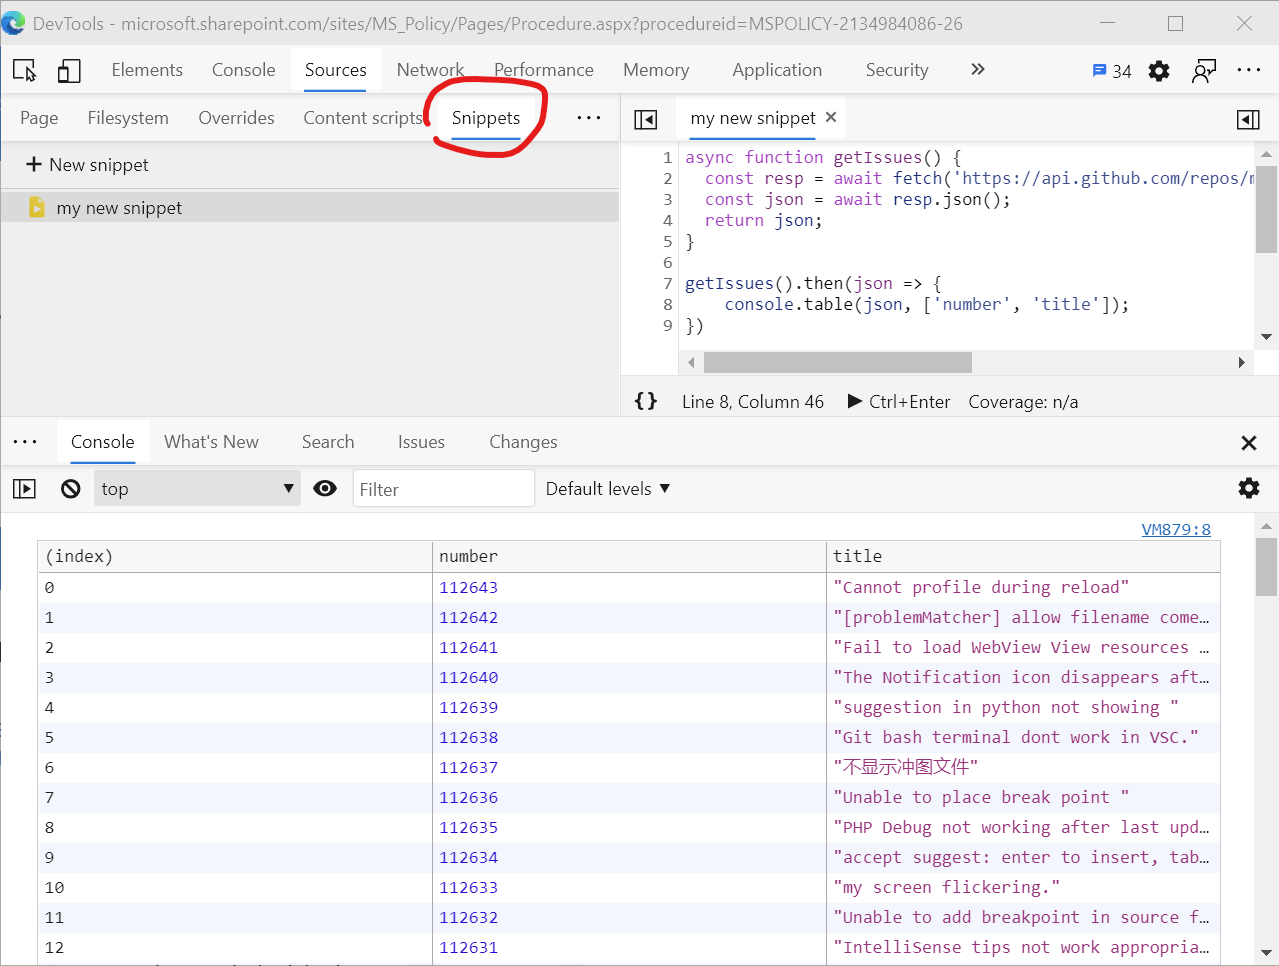 Screenshot of Edge DevTools showing the Sources panel, and within it the Snippets pane that allows creating new code snippets and executing them